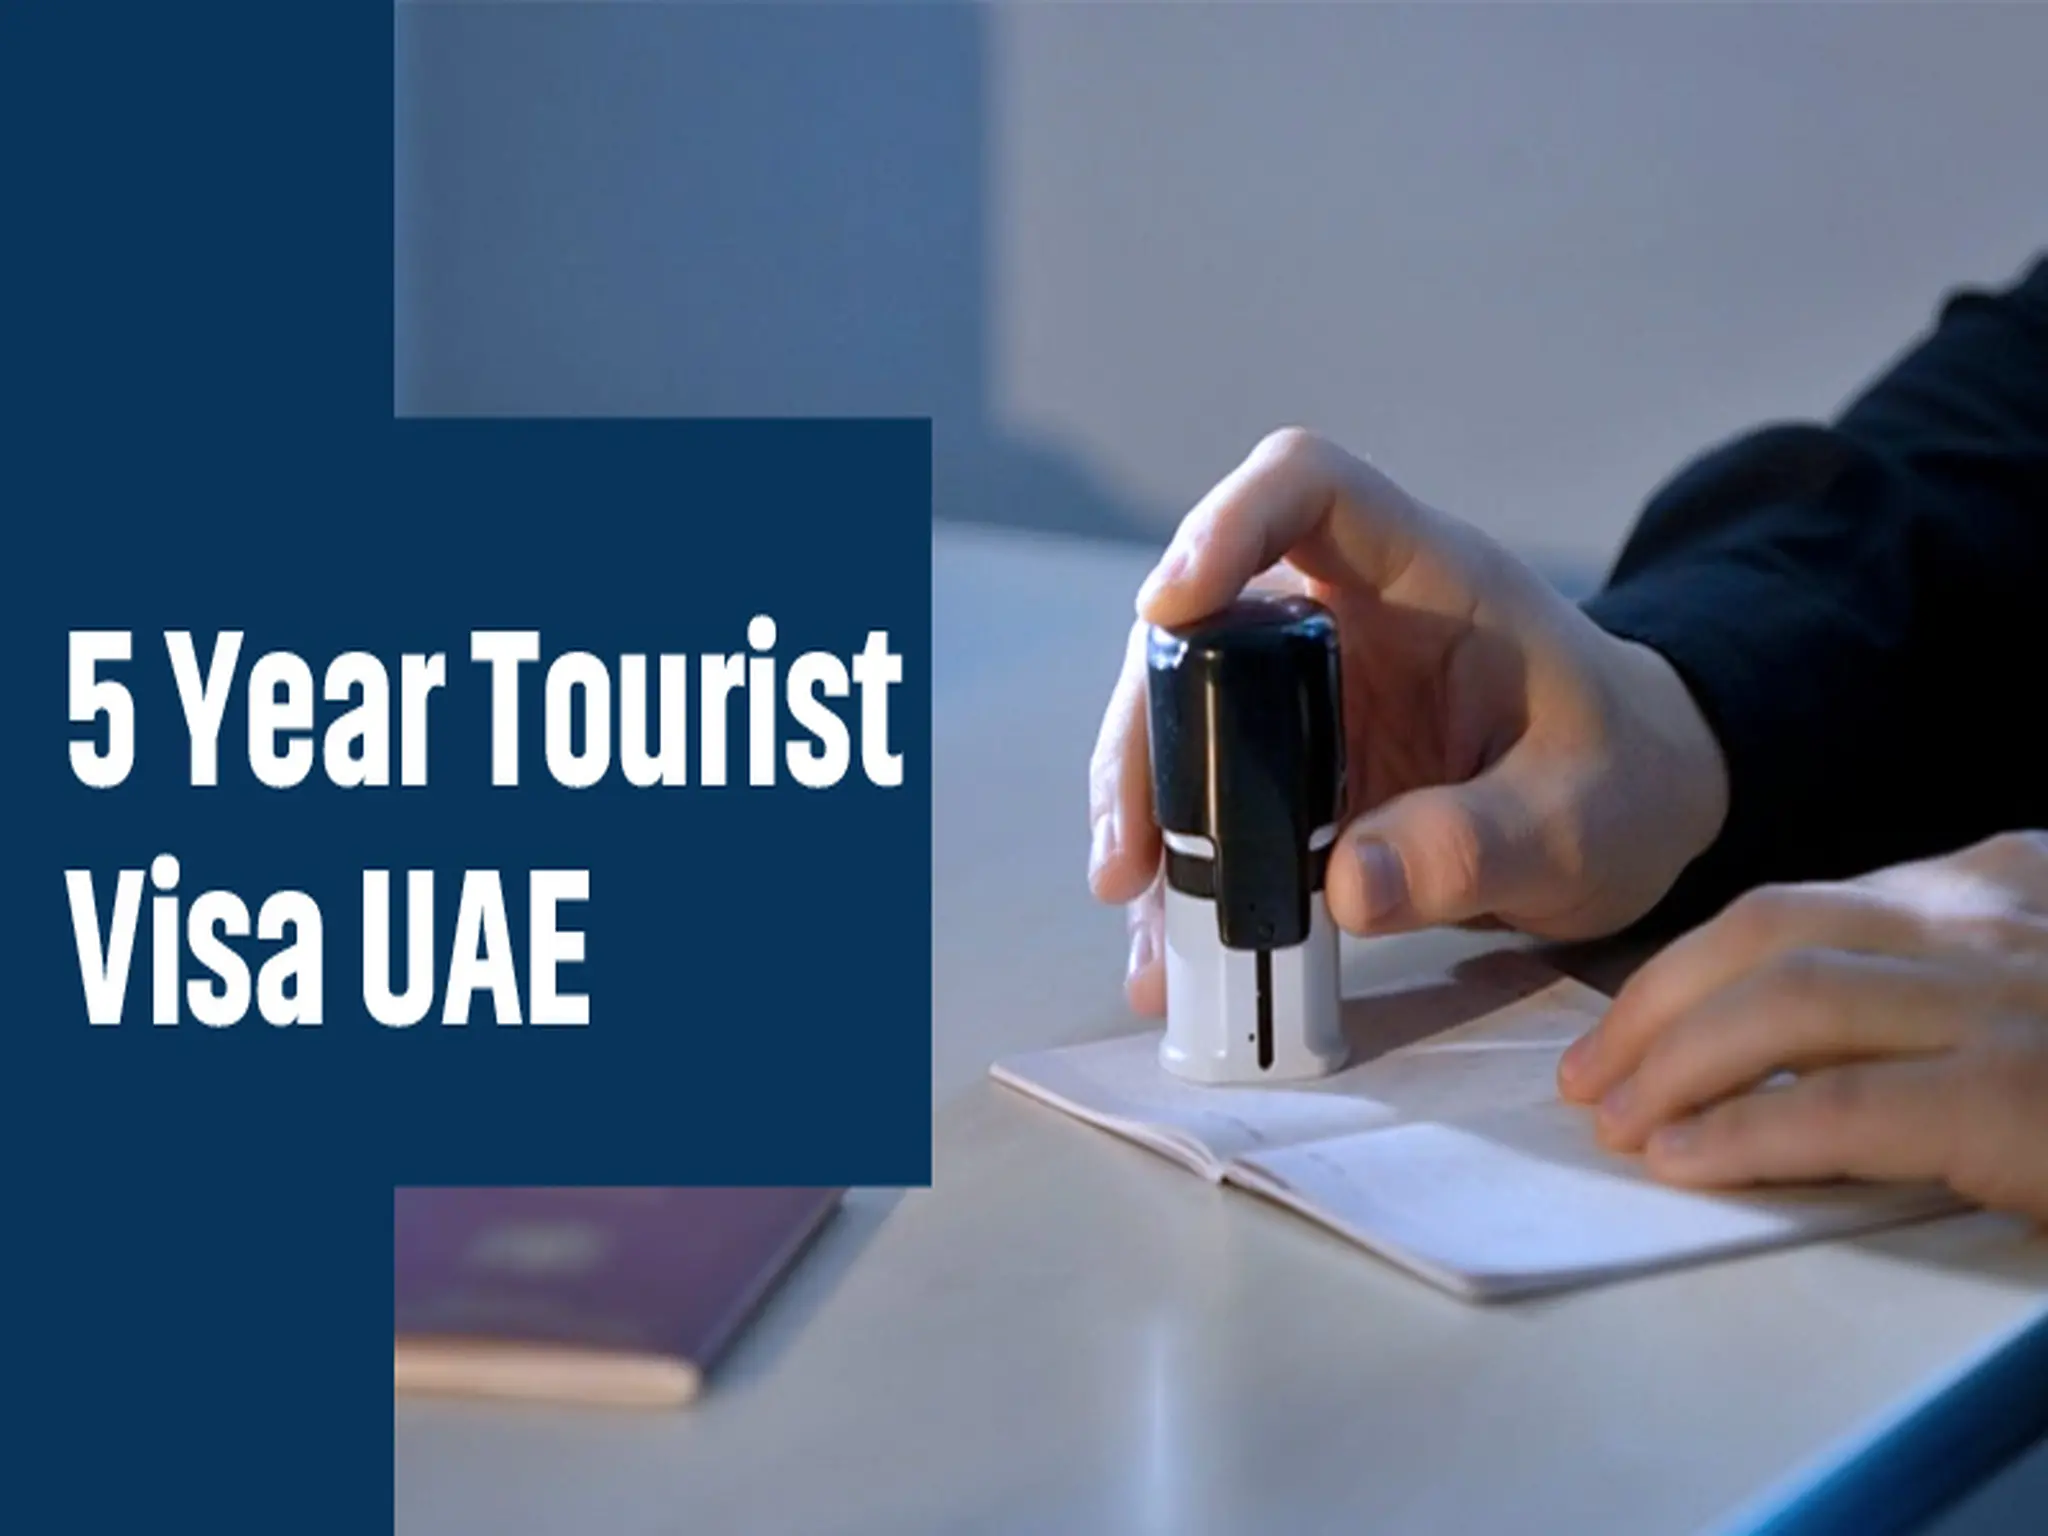 How can I currently apply for a UAE Tourist Visa with 5 Year Multiple Entry?